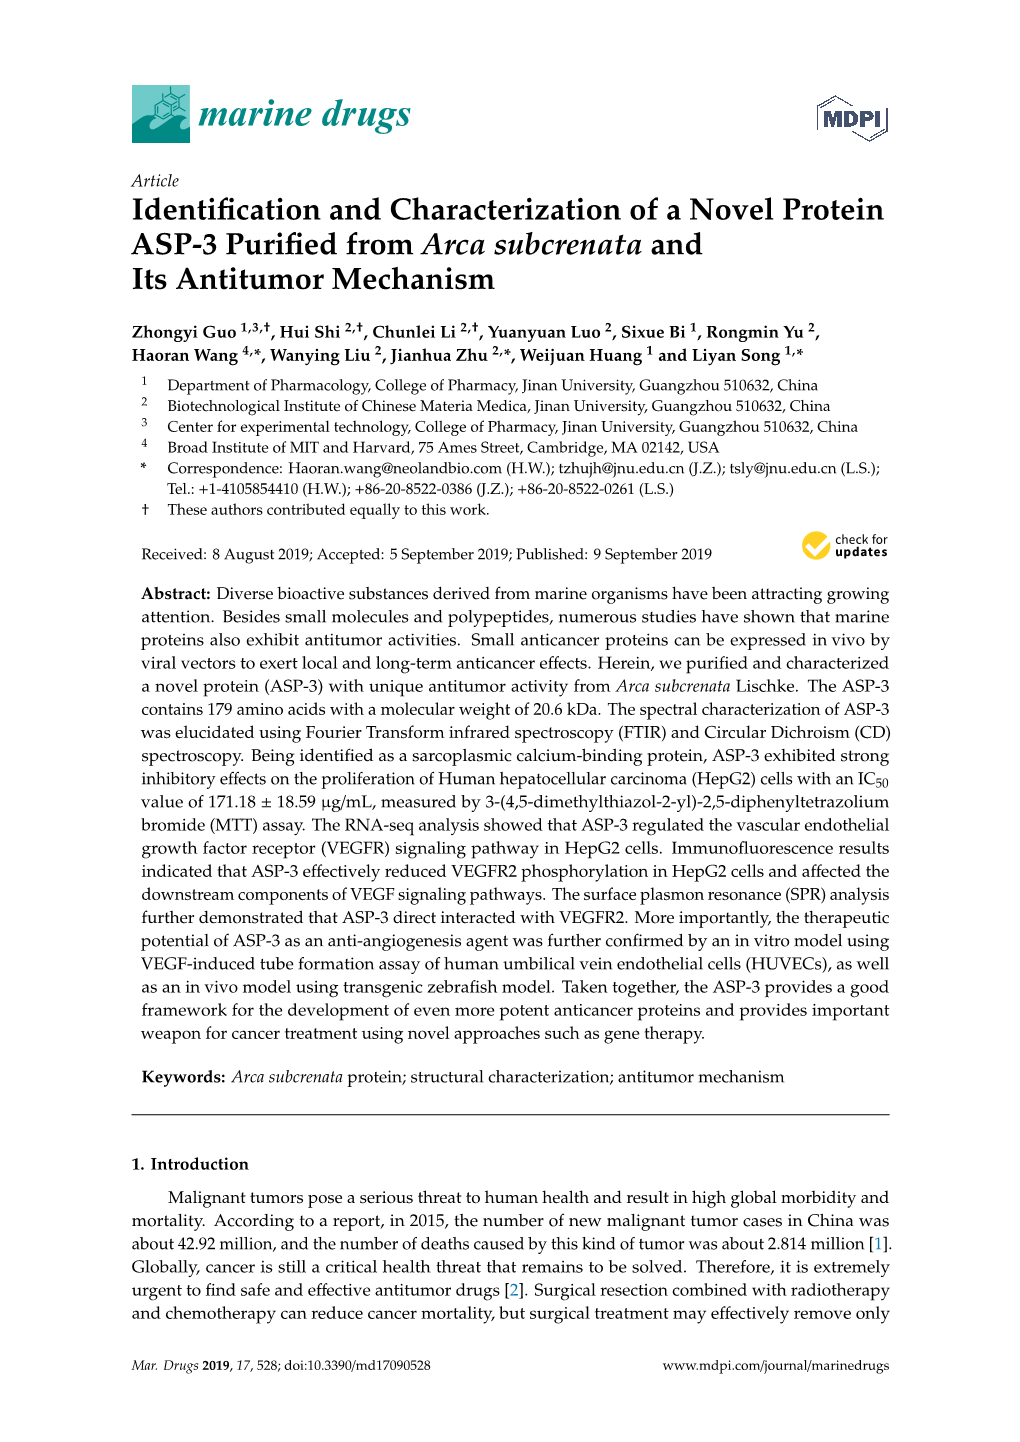 Identification and Characterization of a Novel Protein ASP-3 Purified From